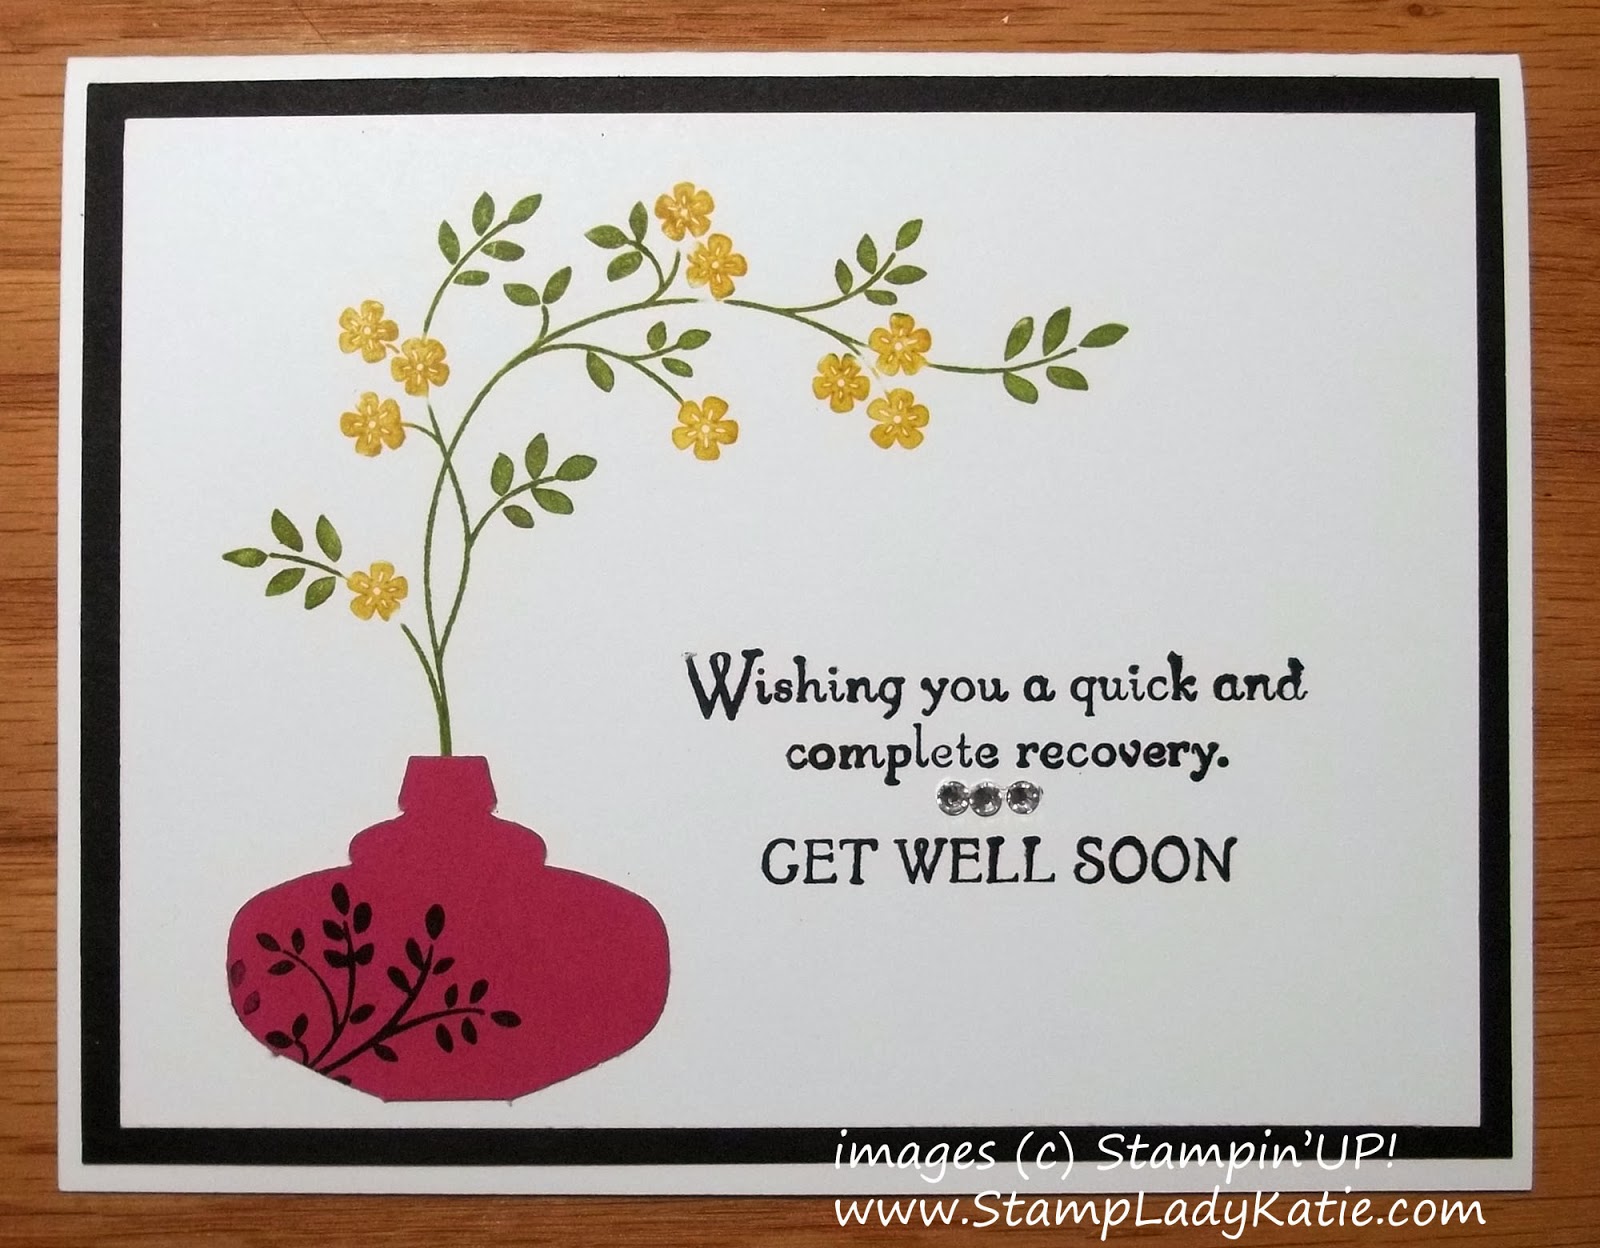 Get Well card with a Punch Art Vase made with Stampin'UP!'s Ornament Punch